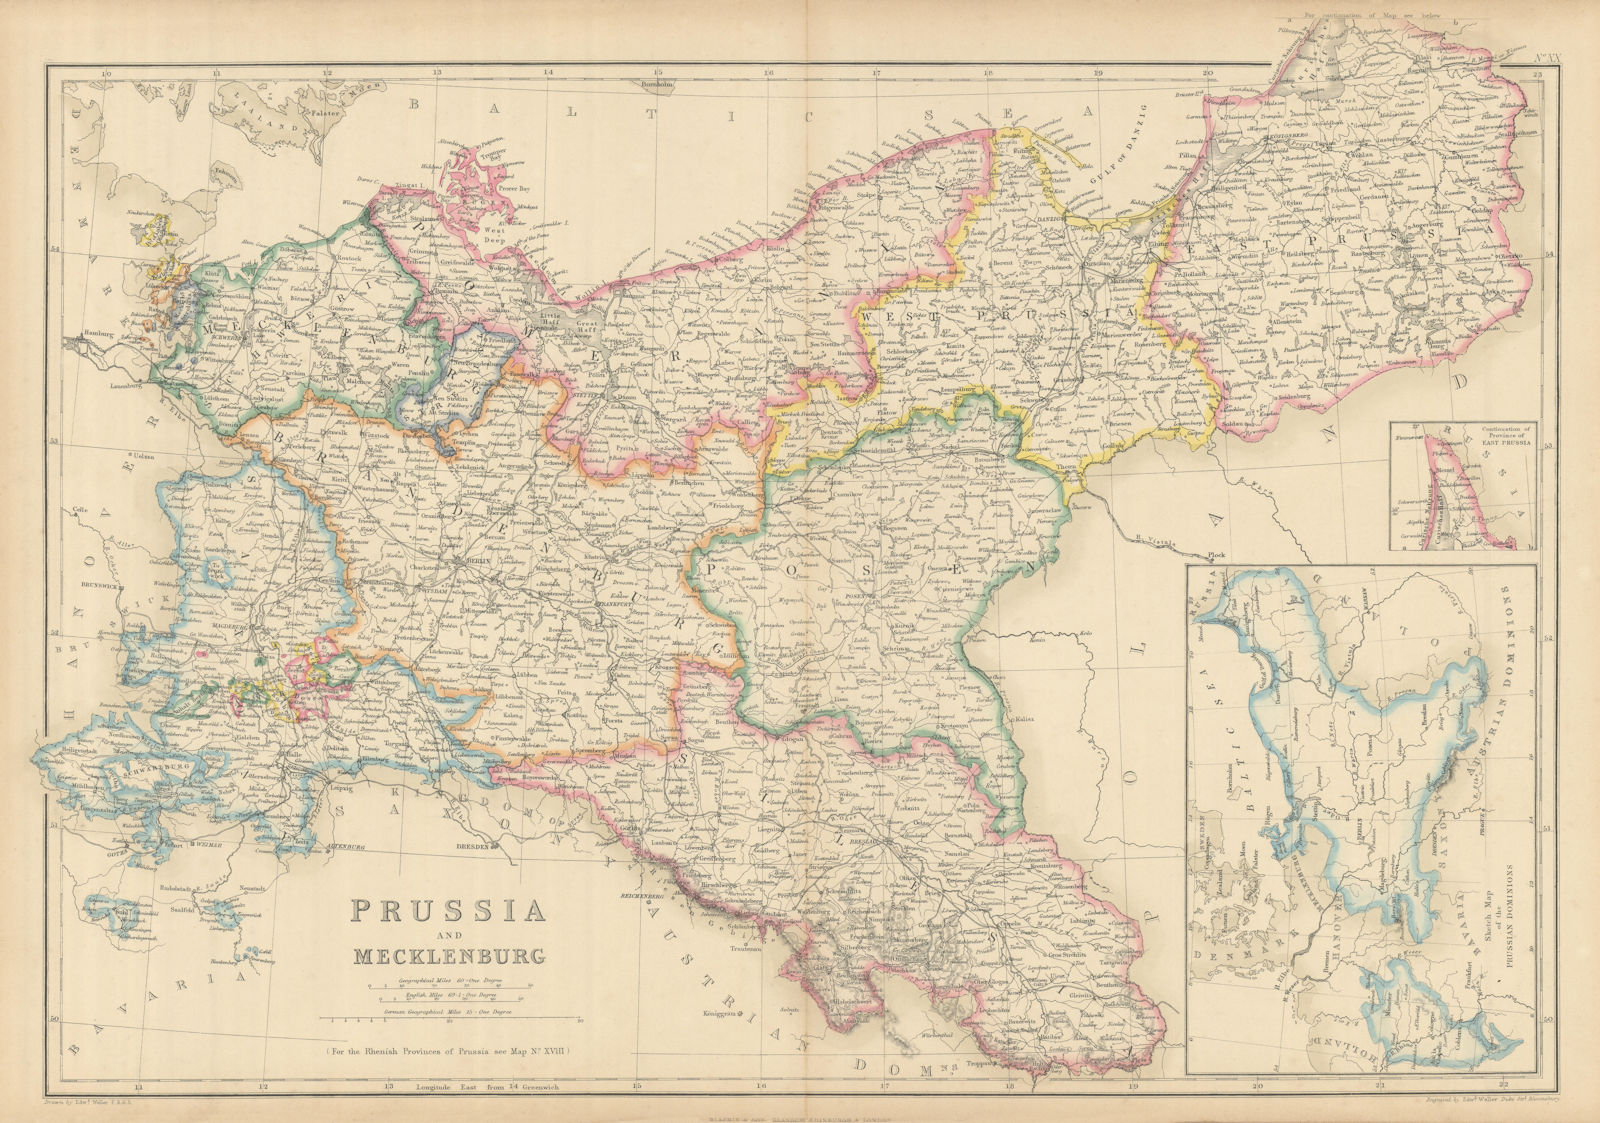 Associate Product Prussia and Mecklenburg by Edward Weller. Germany & Poland 1860 old map